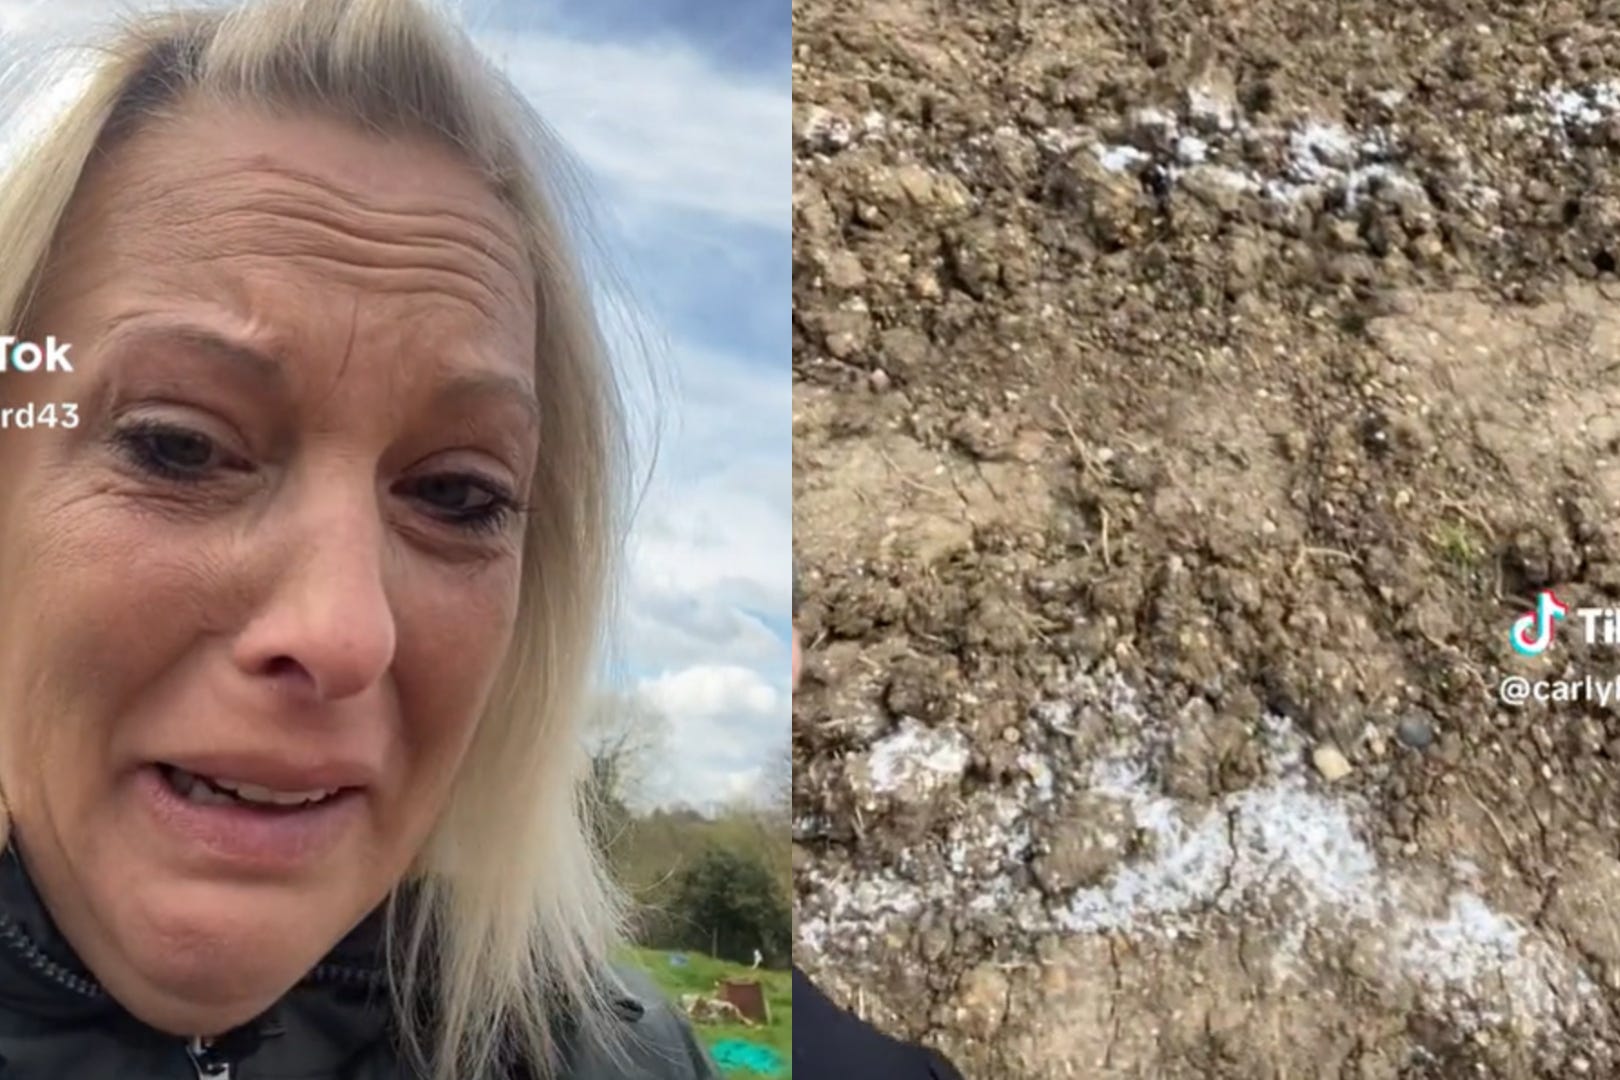 The founder of an allotment that was vandalised with salt has been “overwhelmed by everybody’s generosity” after her GoFundMe sailed past the £165,000 mark (carlyburd43/TikTok/PA)